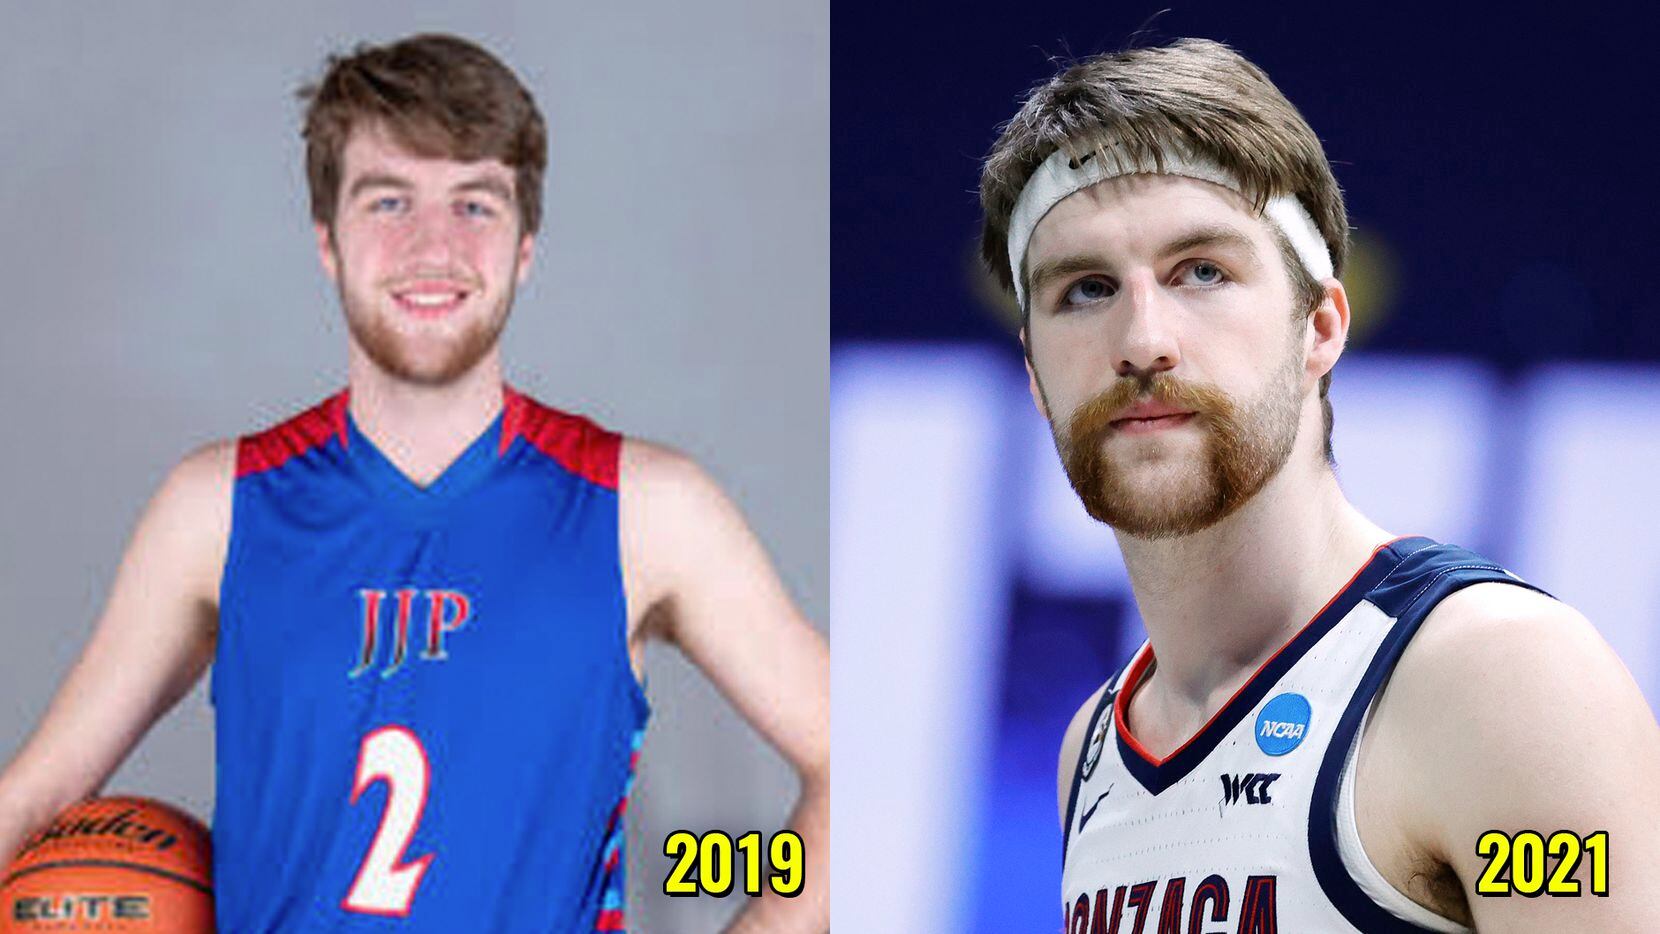 Mustache magic: While chasing NCAA history with Gonzaga